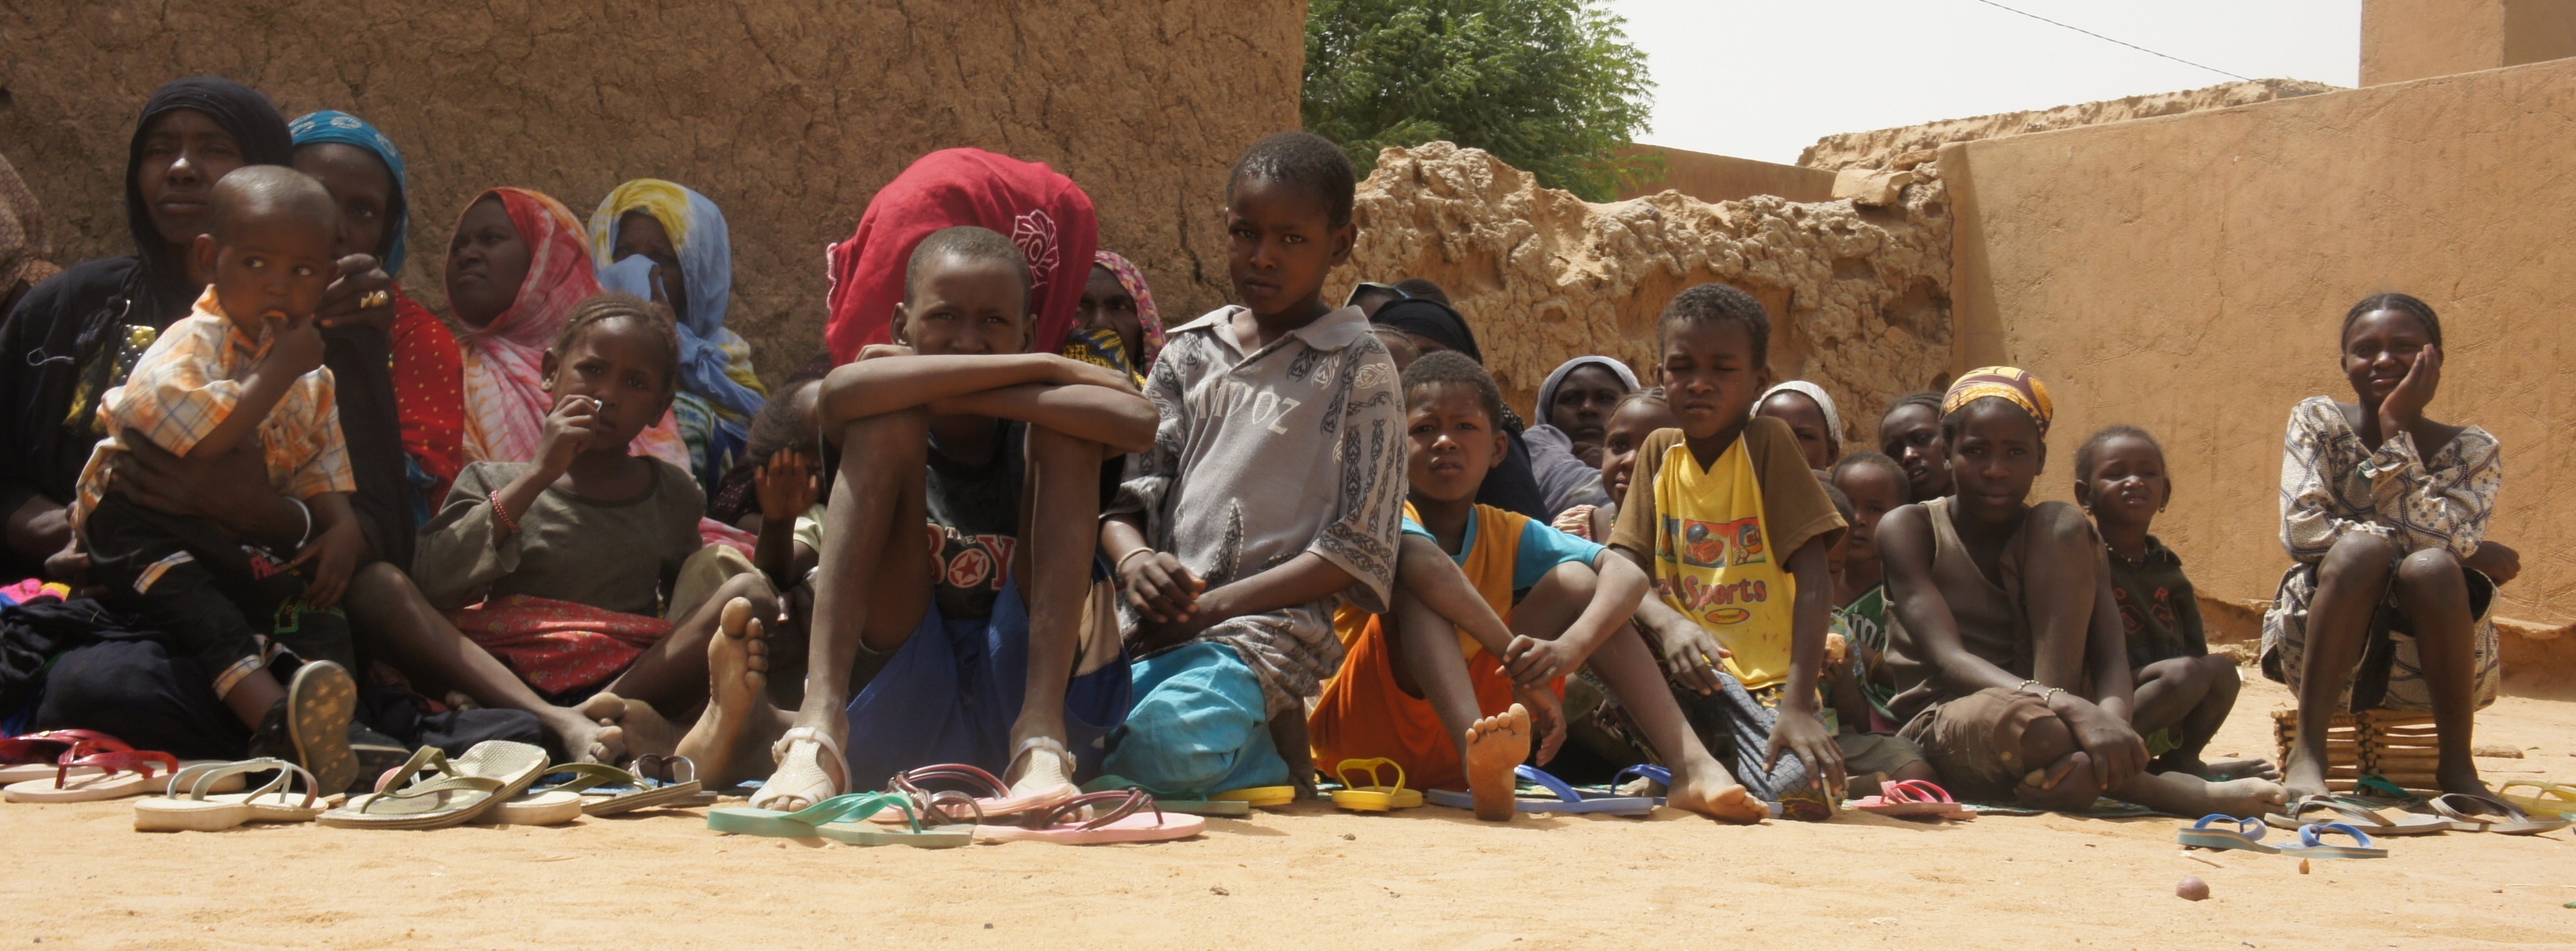 Displaced women and children in northern Mali